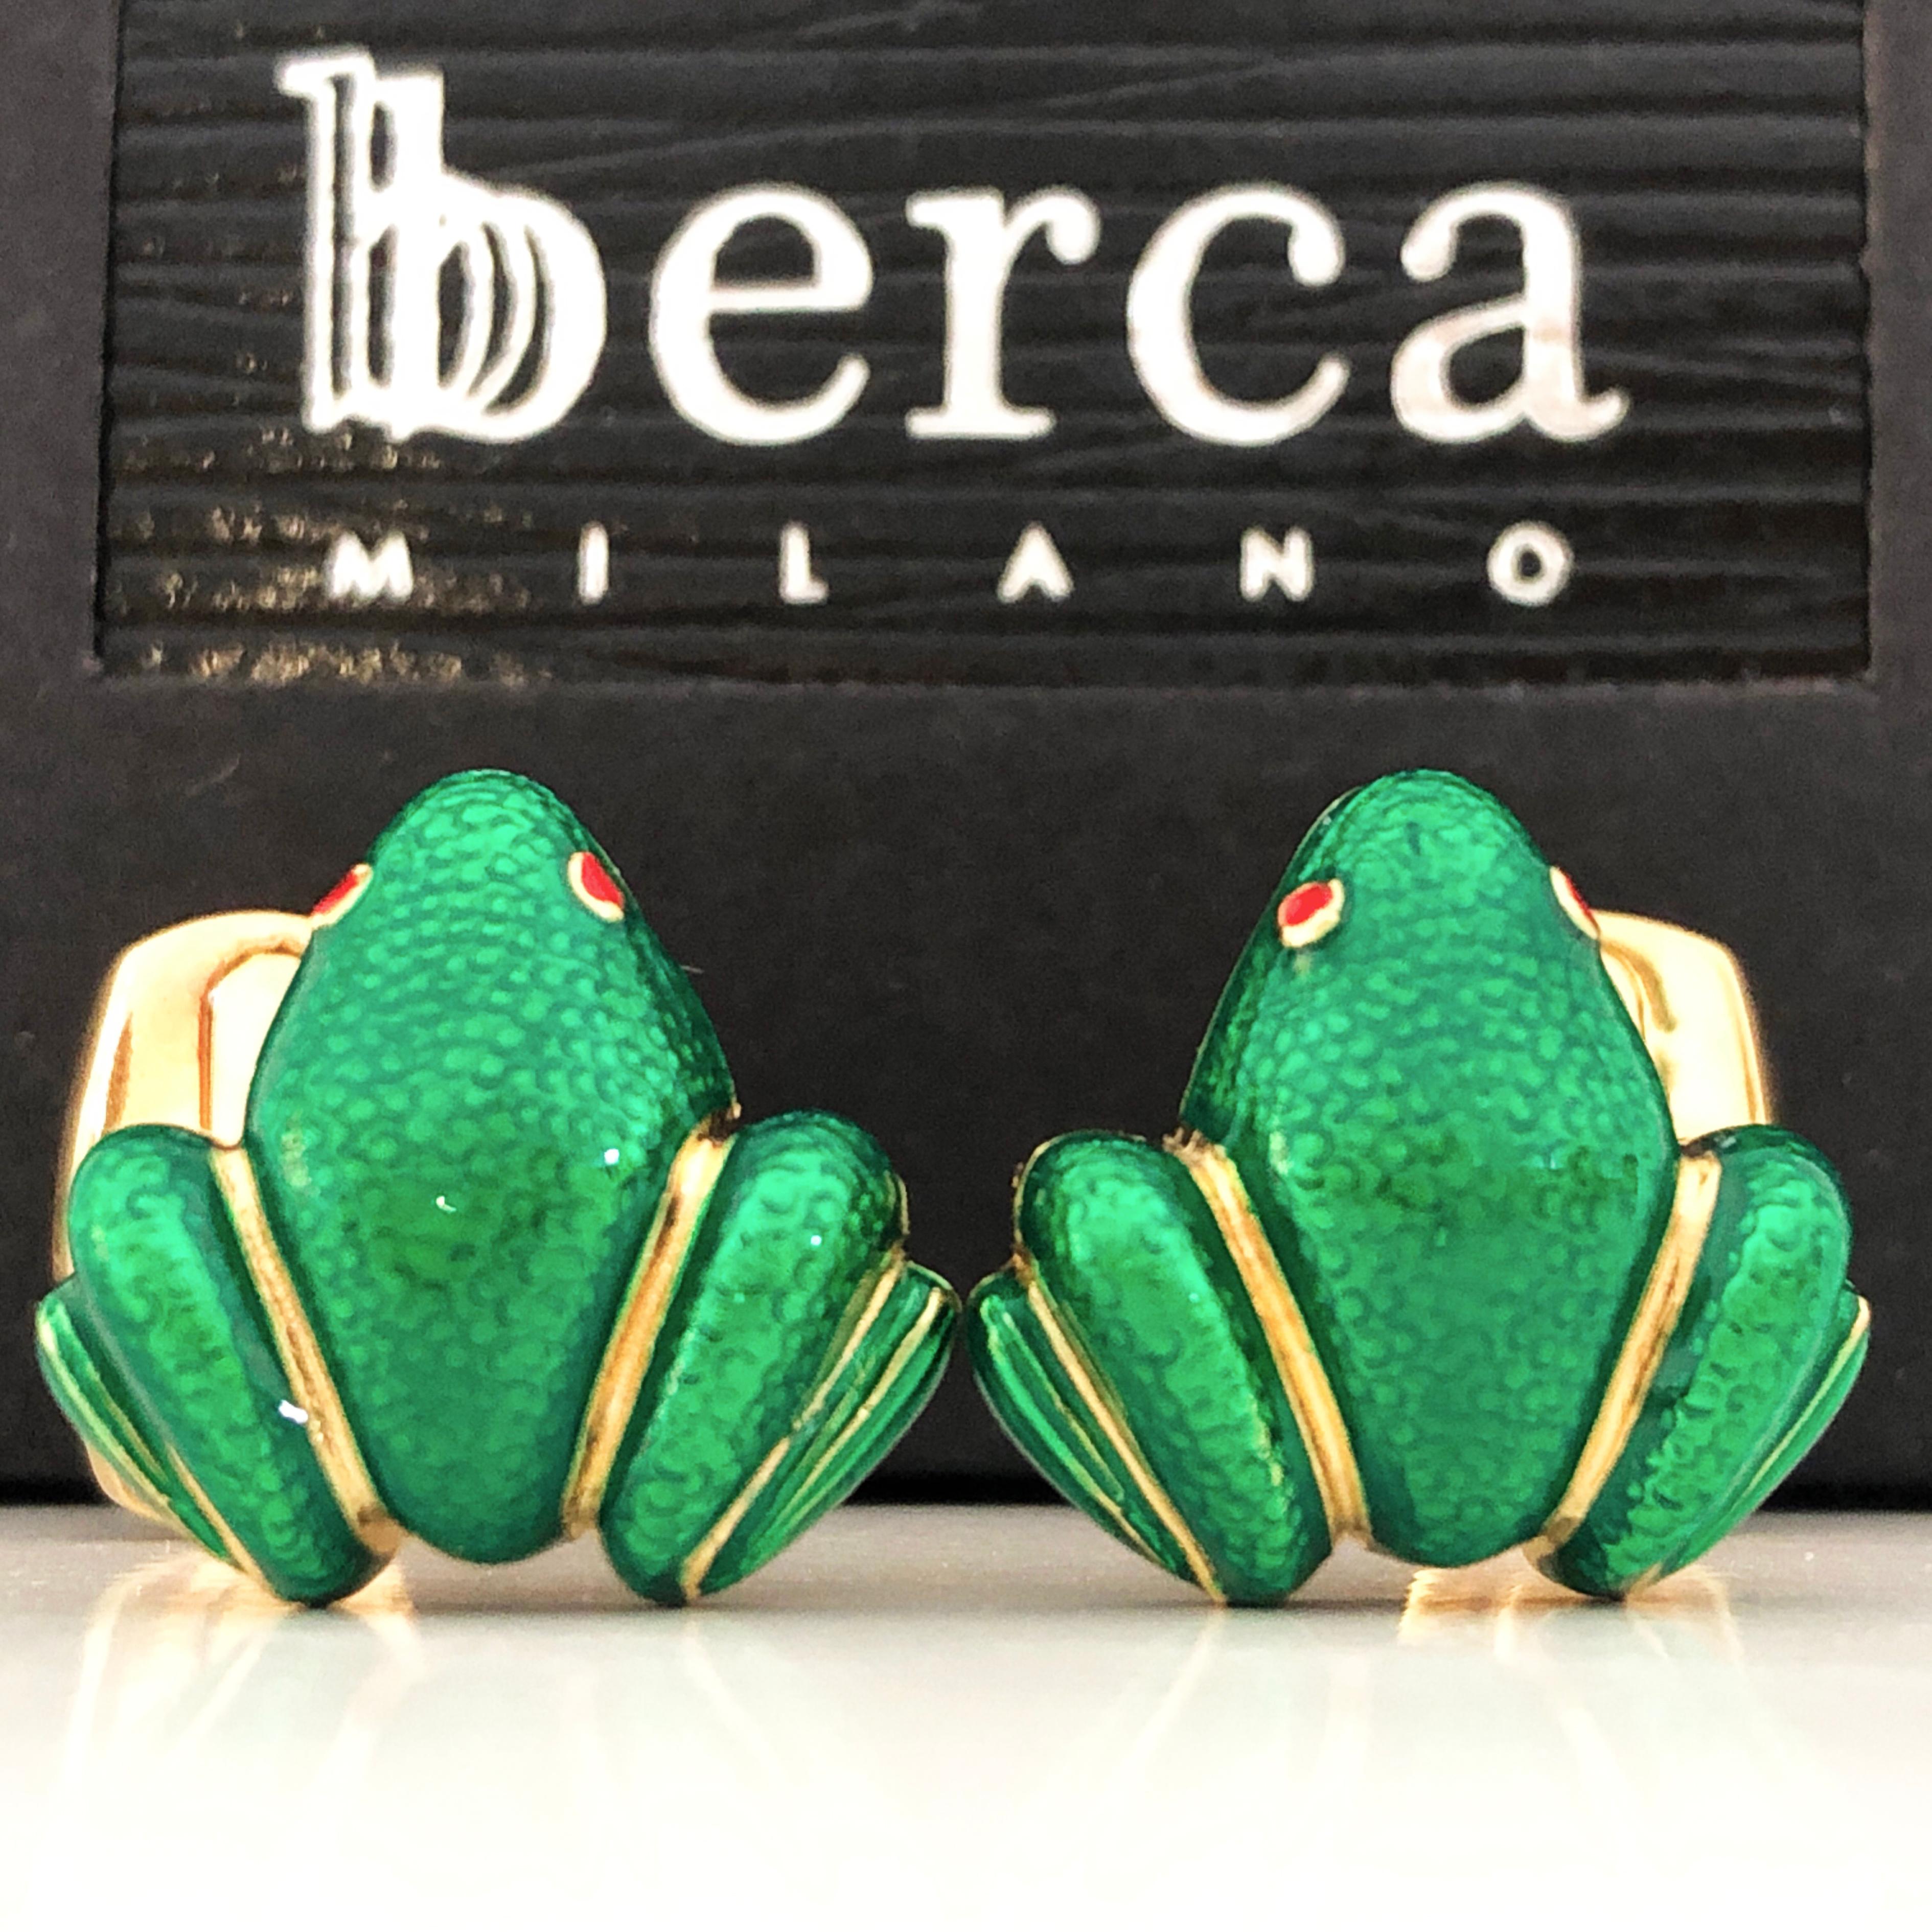 Unique and Chic Emerald Green Hand Enamelled Little Frog Shaped T-Bar Back, Sterling Silver Yellow Gold Plated Cufflinks.
In our smart black box and Pouch.
Express Shipping is still available to all destinations.
